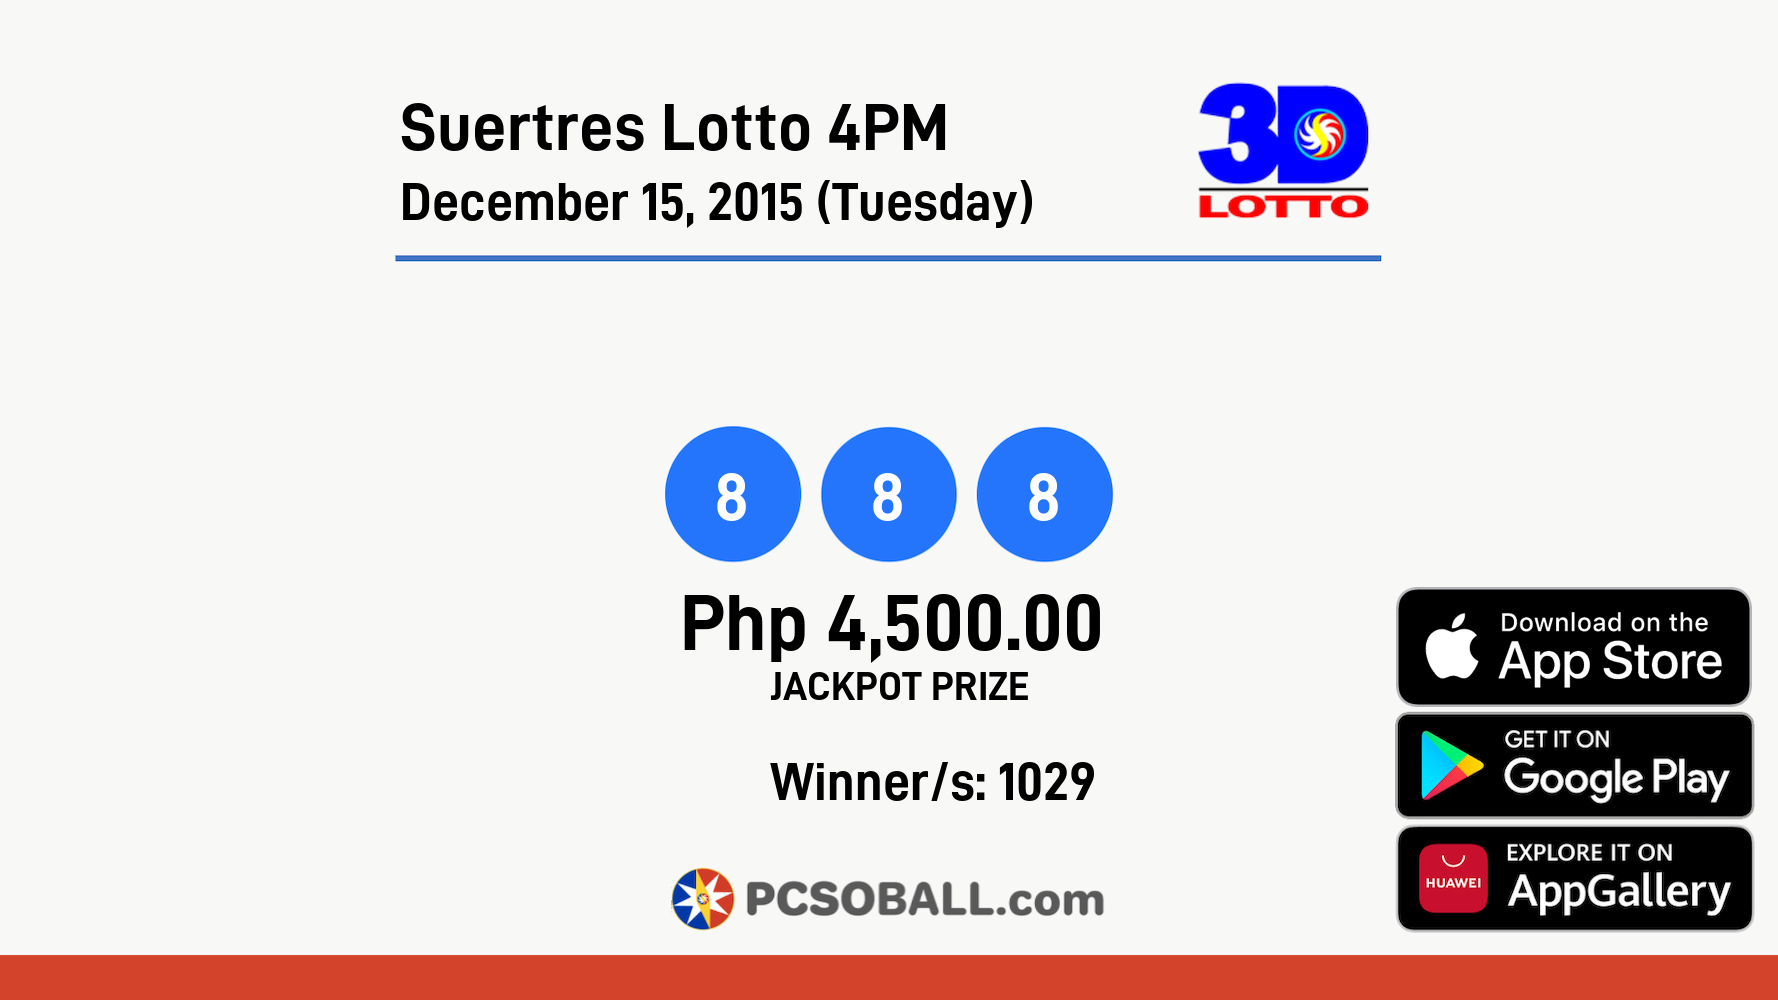 Suertres Lotto 4PM December 15, 2015 (Tuesday) Result